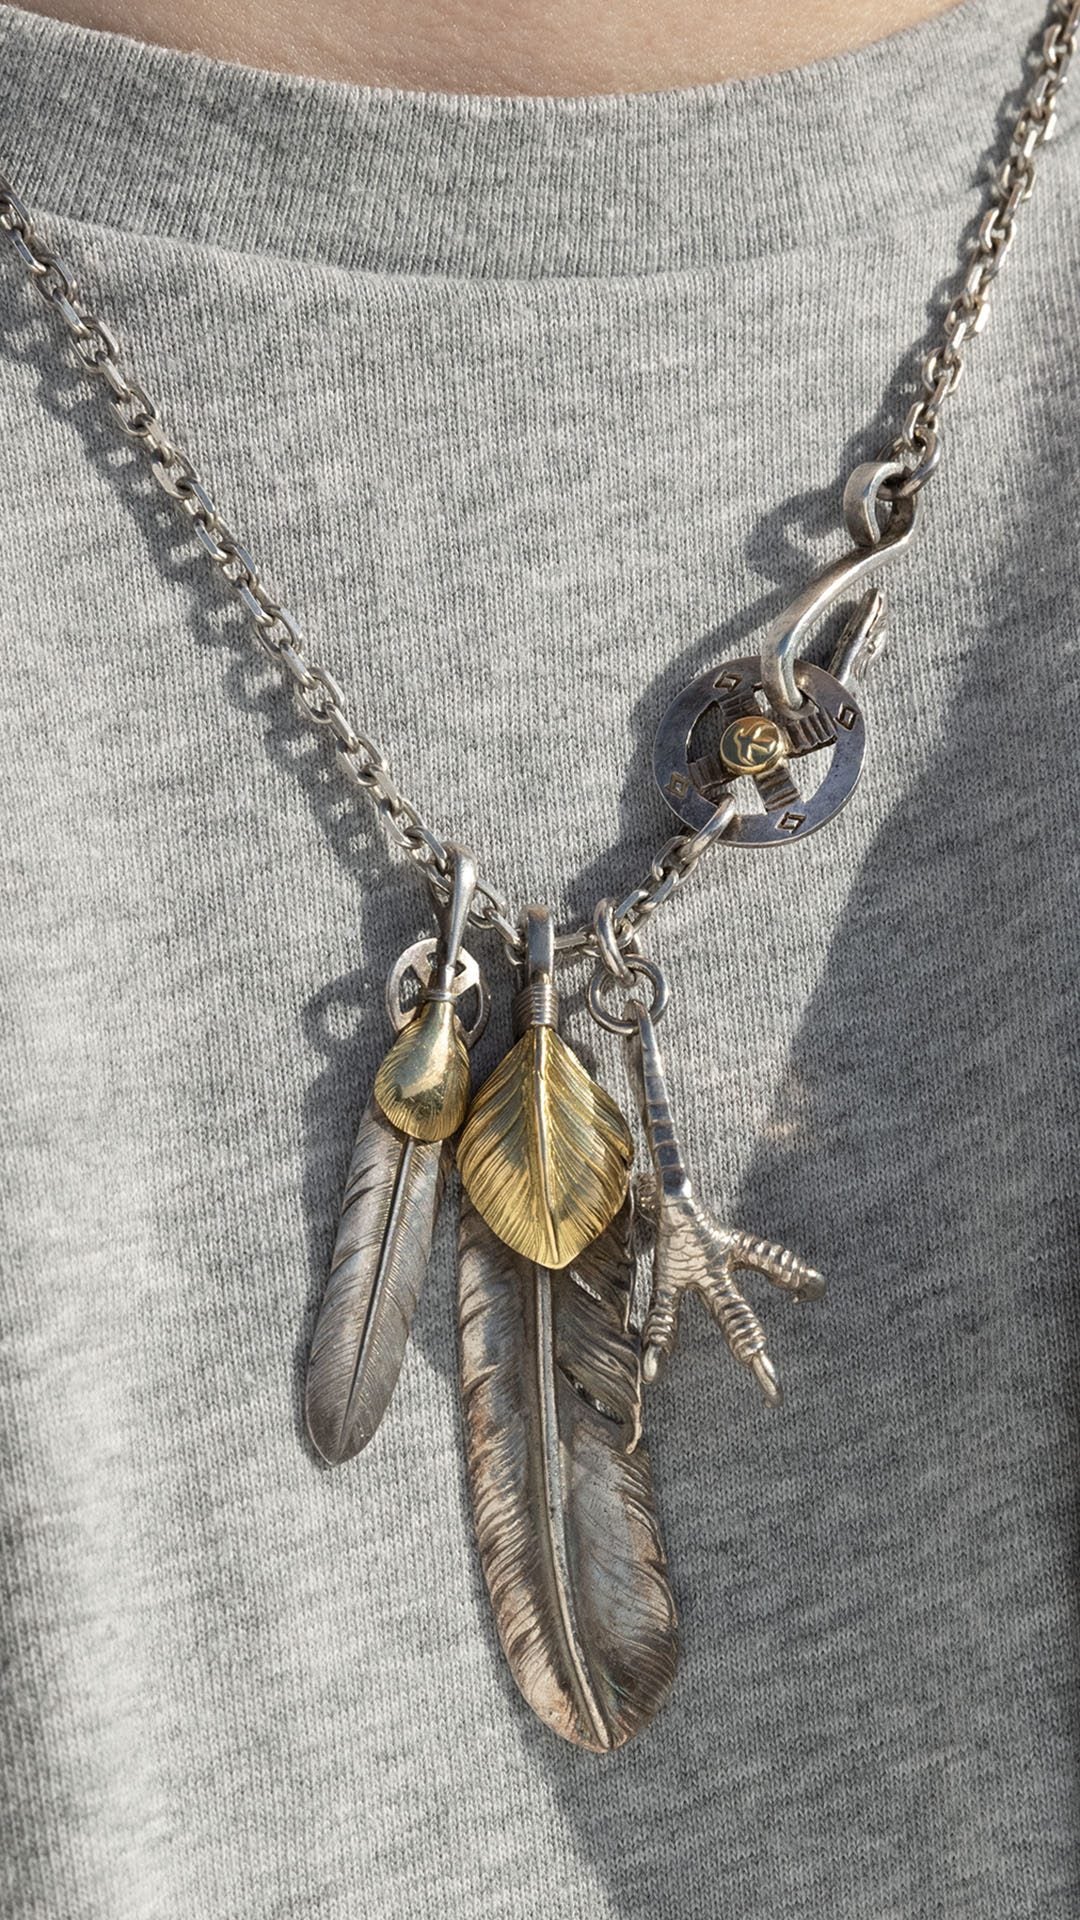 Goros XL Silver Claw Left, XL Gold Top Right Feathers - Native Feather